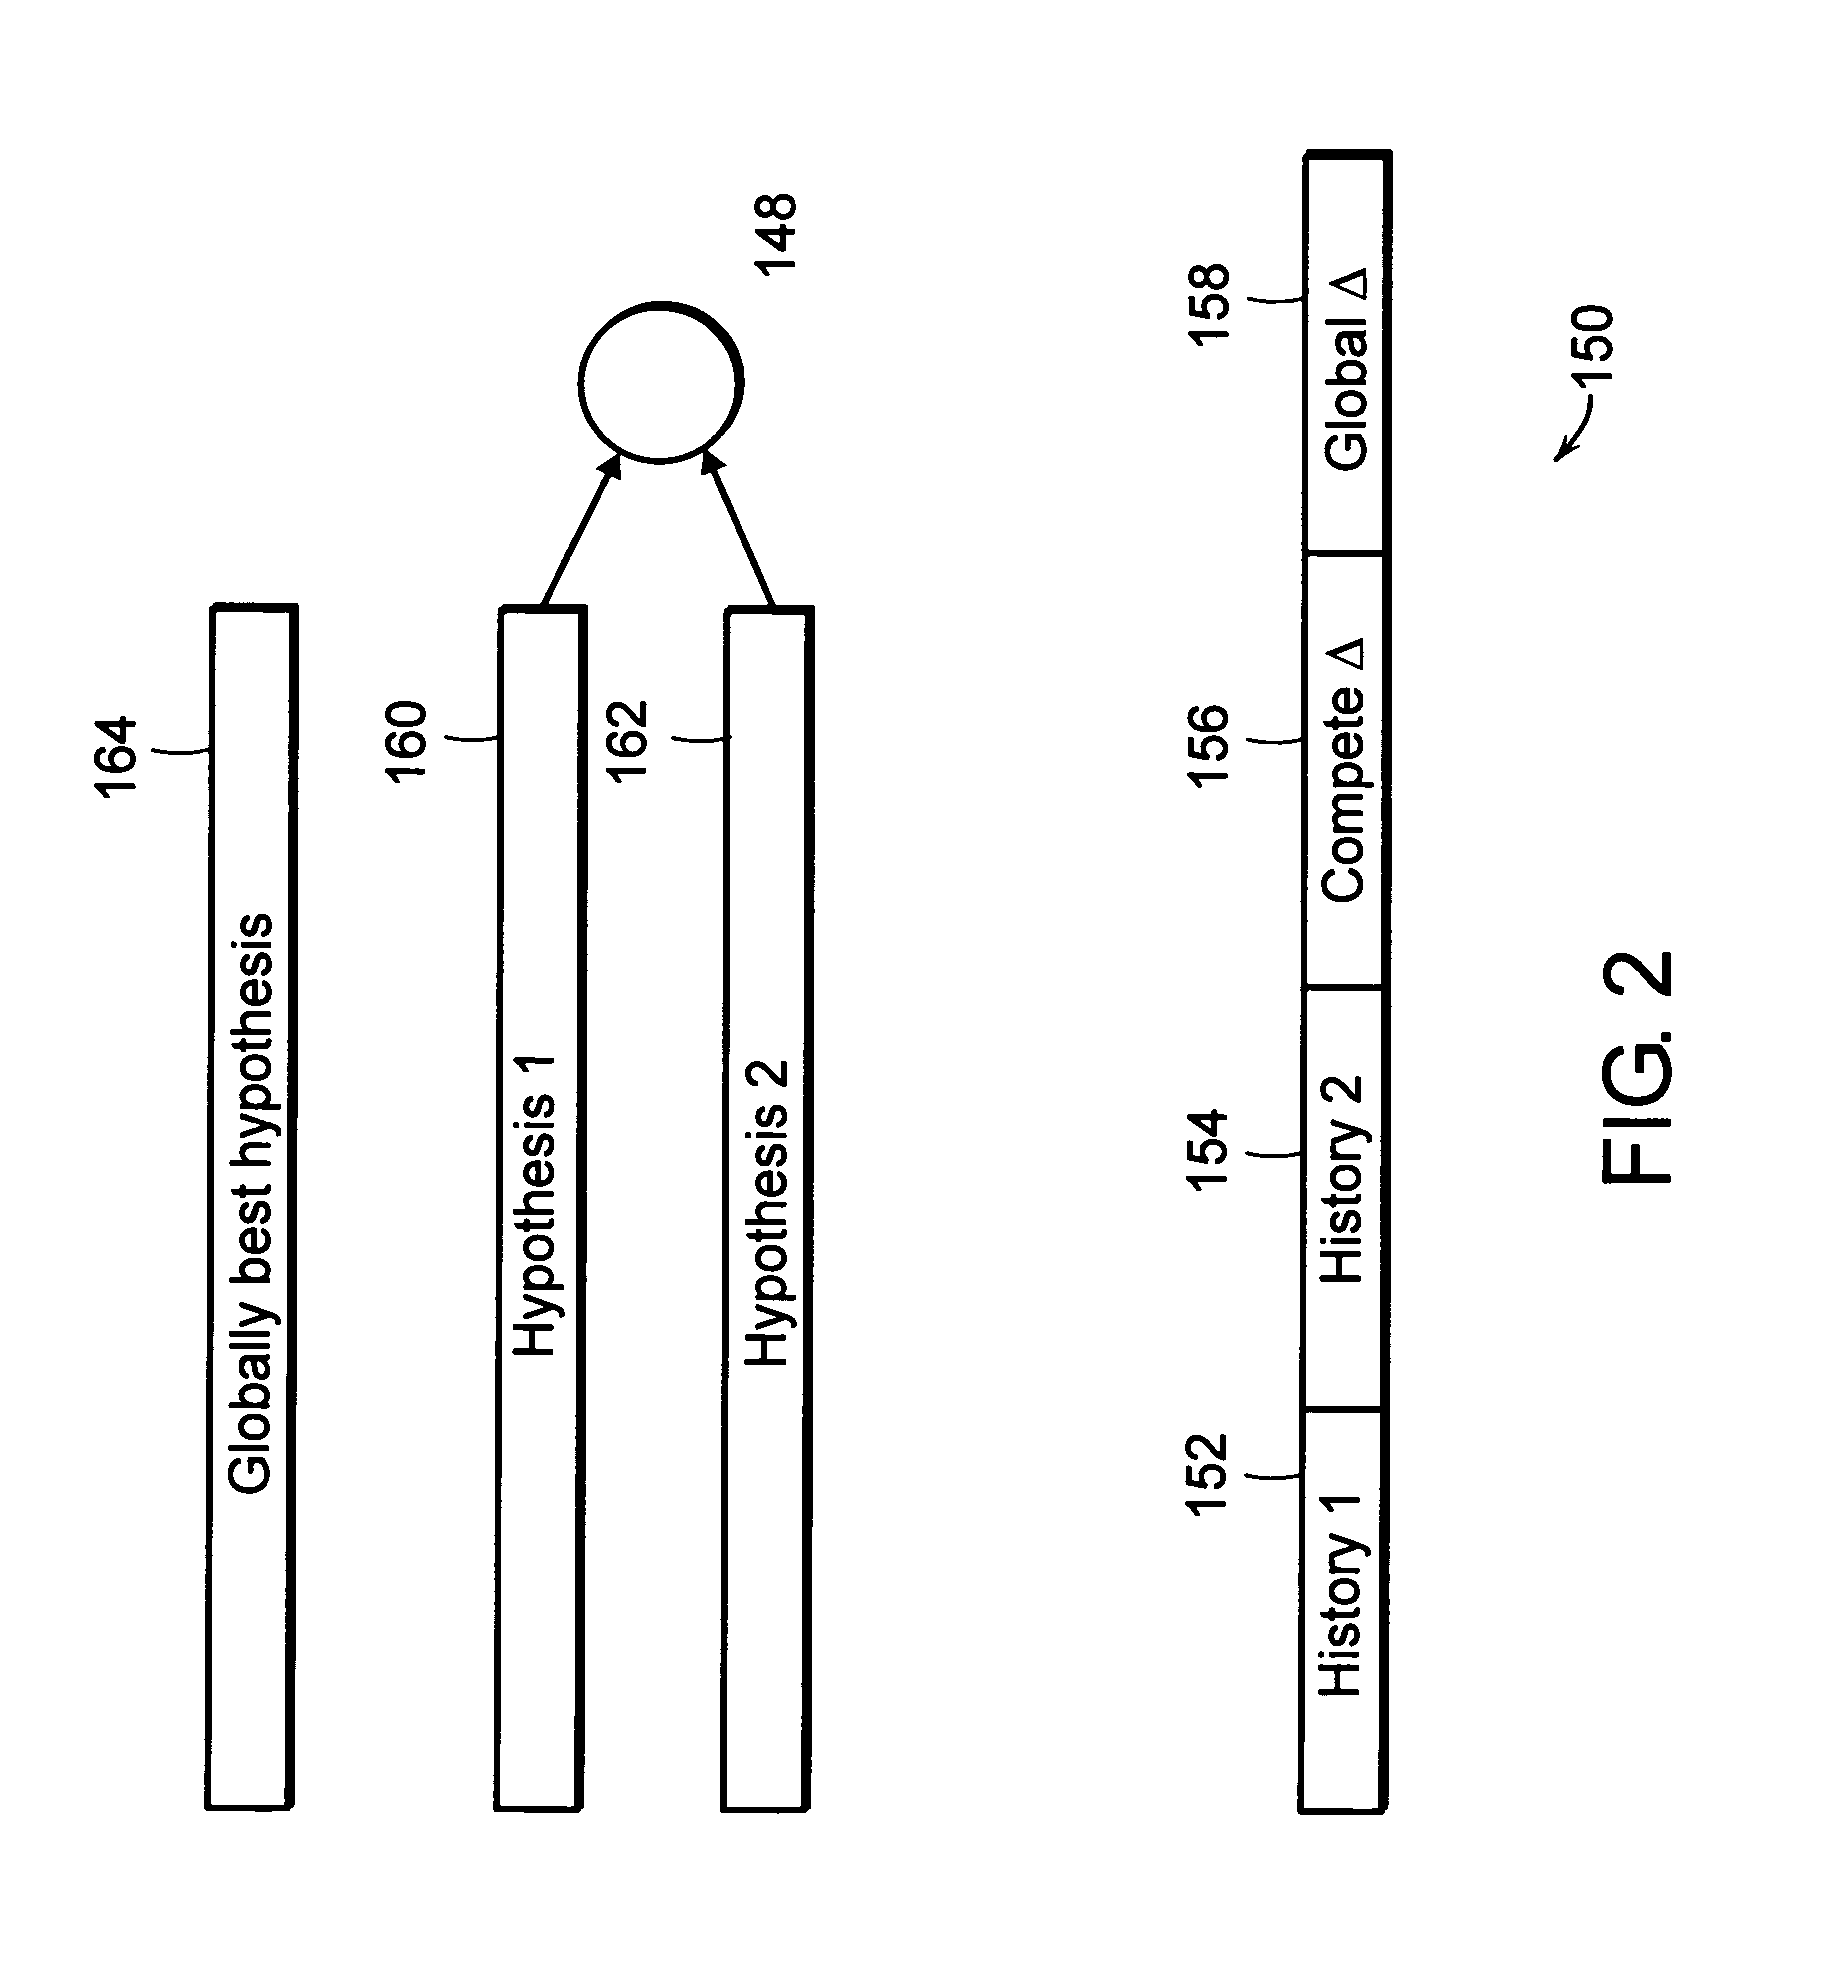 Method of producing alternate utterance hypotheses using auxiliary information on close competitors